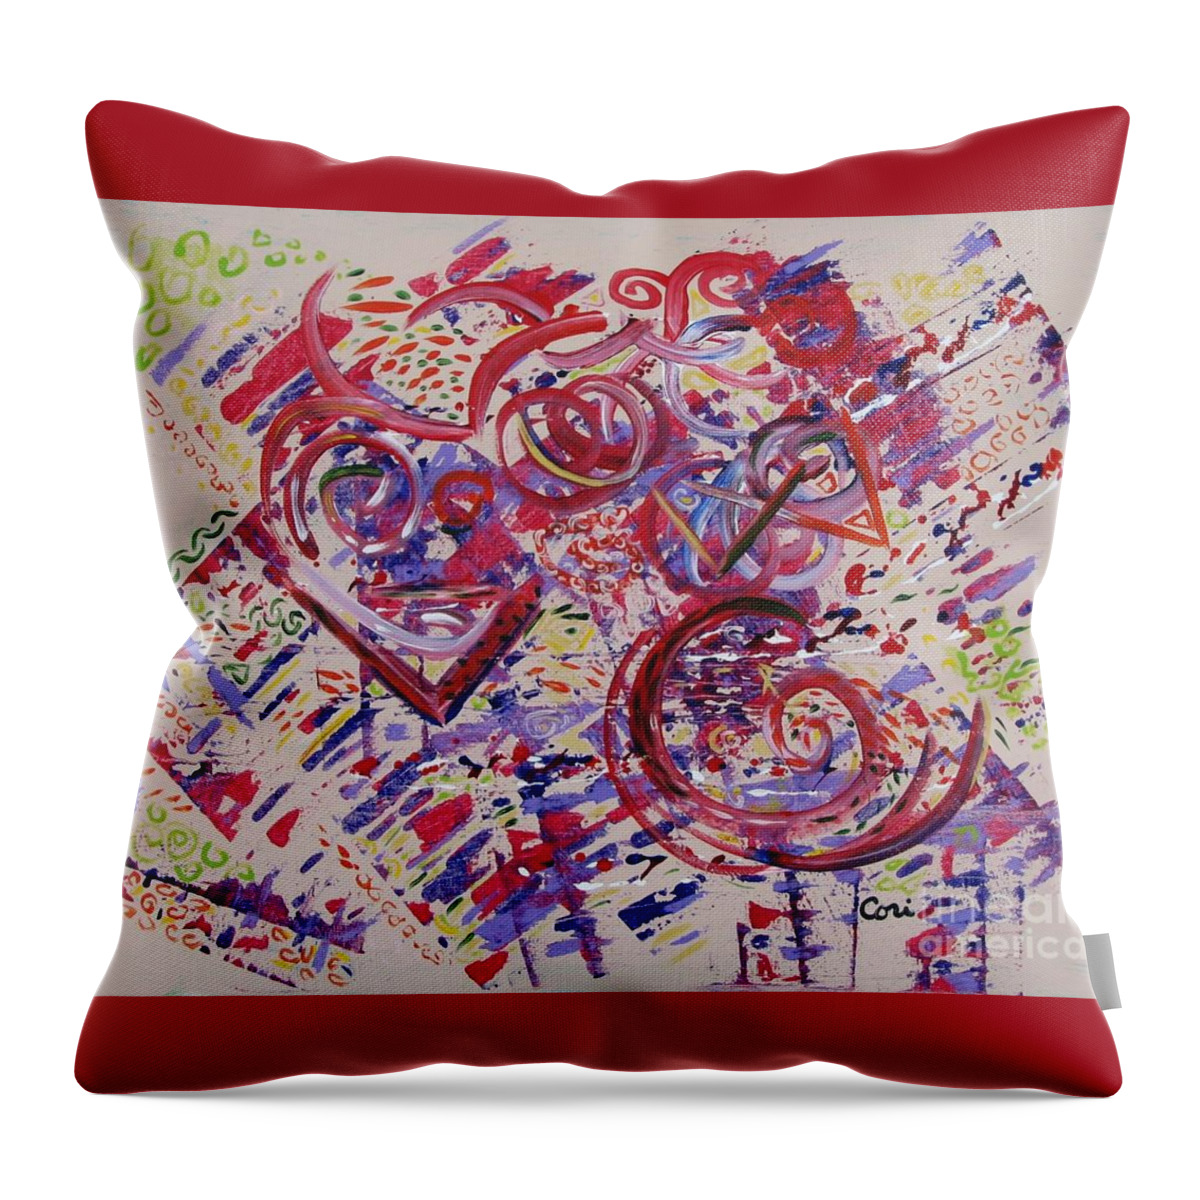 Carnival Throw Pillow featuring the painting Carnival Mind by Corinne Carroll